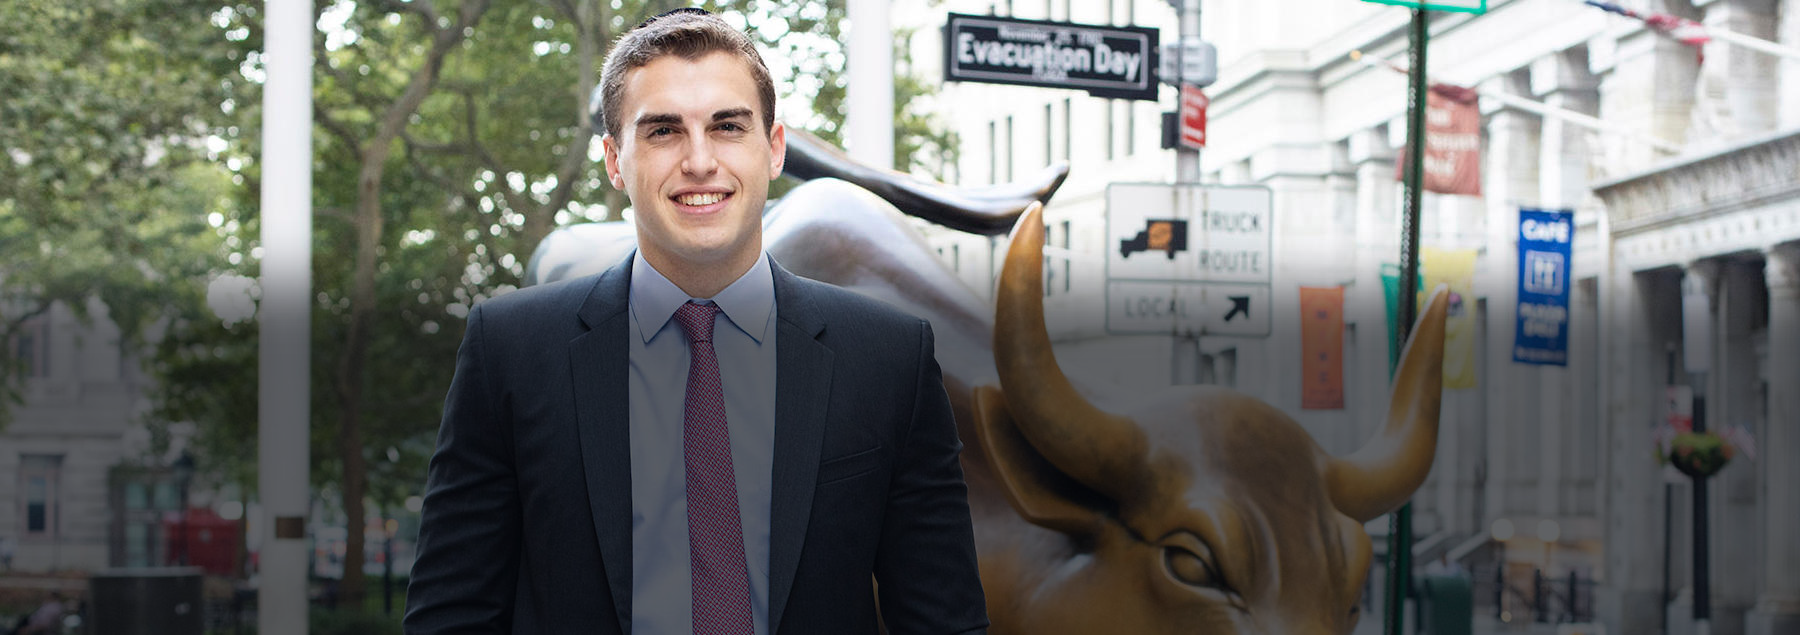 Michael Klein standing in front of a charging bull statue